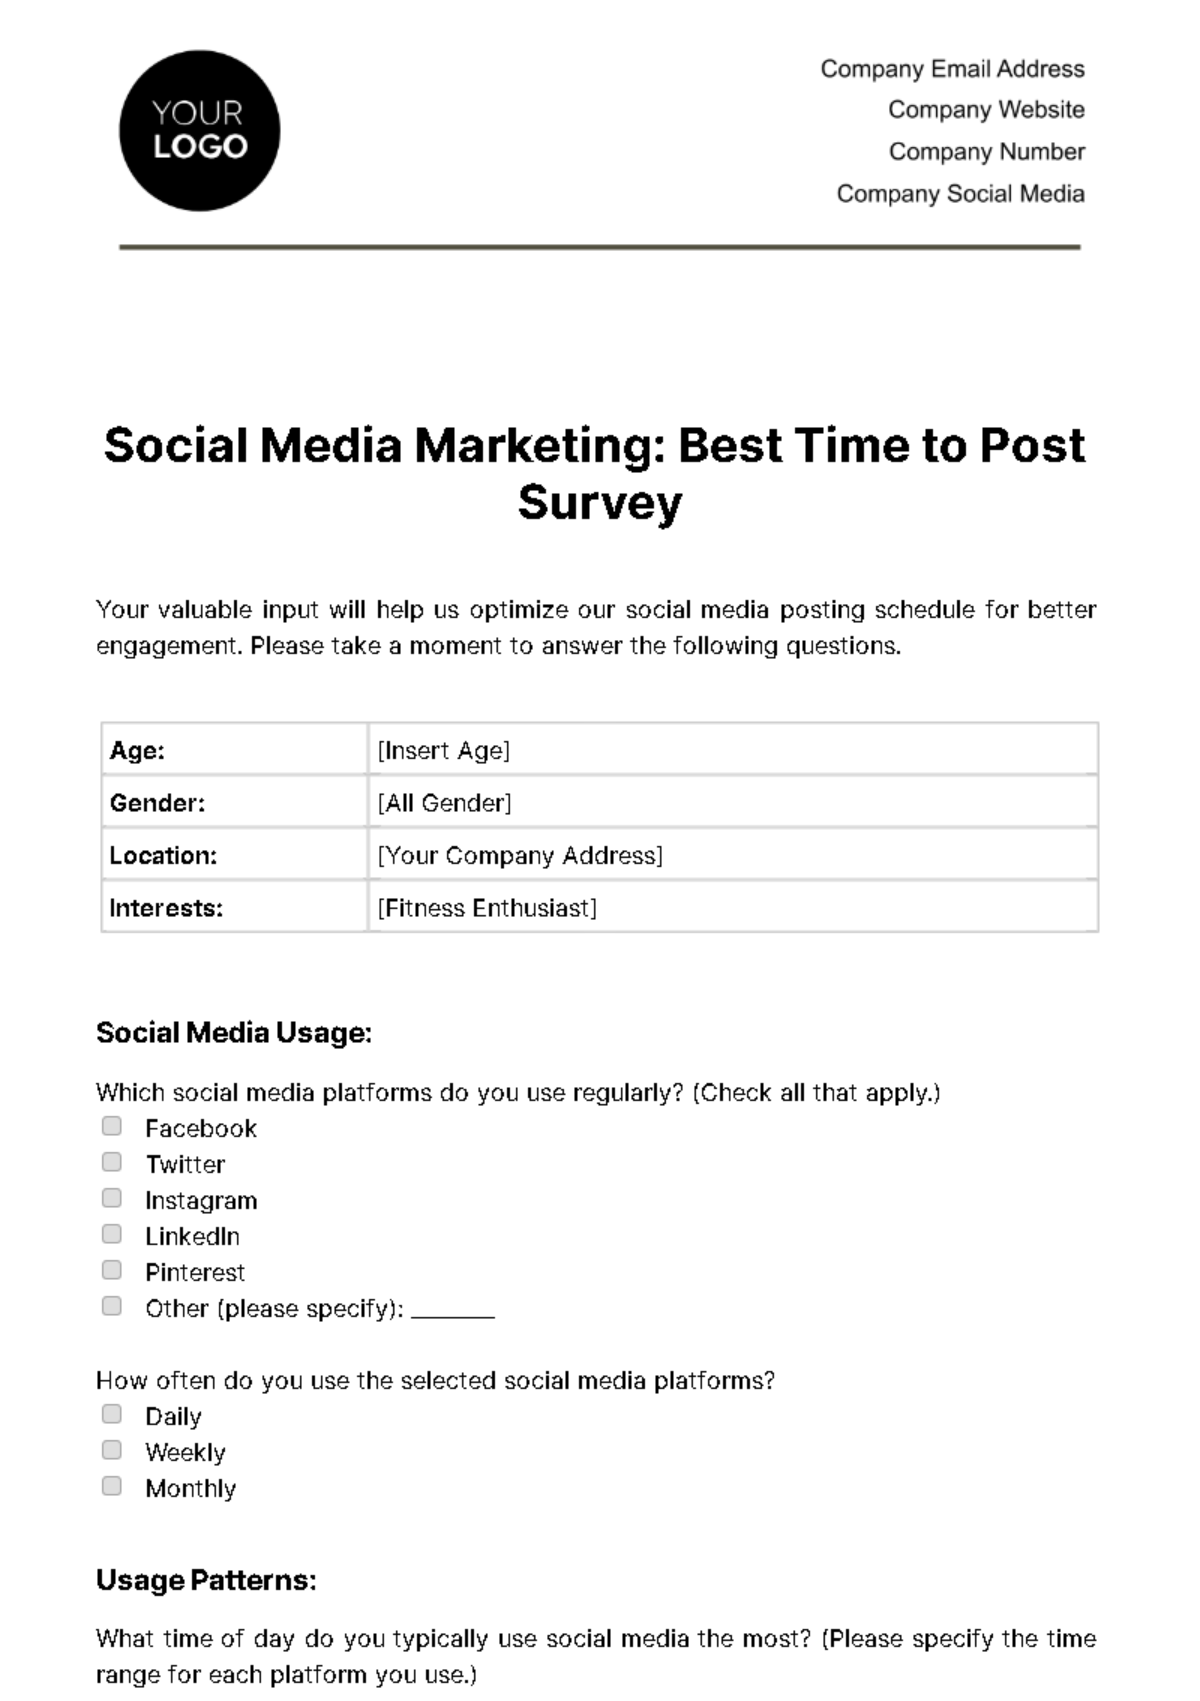 Social Media Marketing Best Time to Post Survey Template